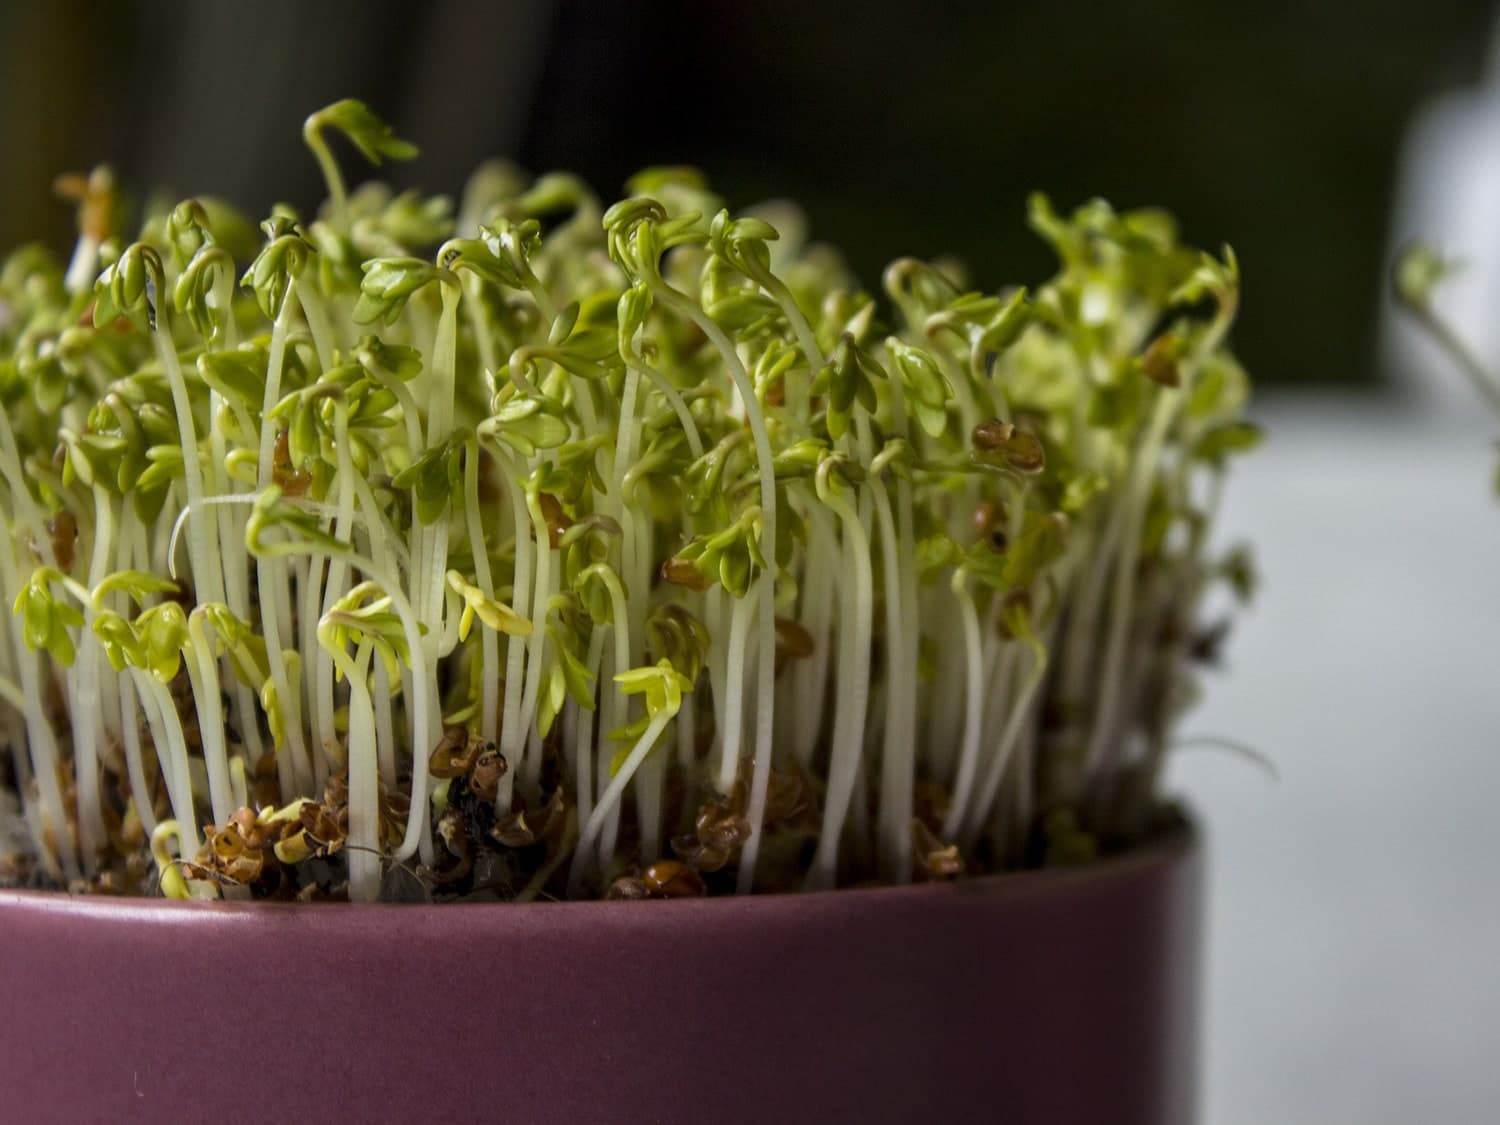 Sprouts growing in a pot